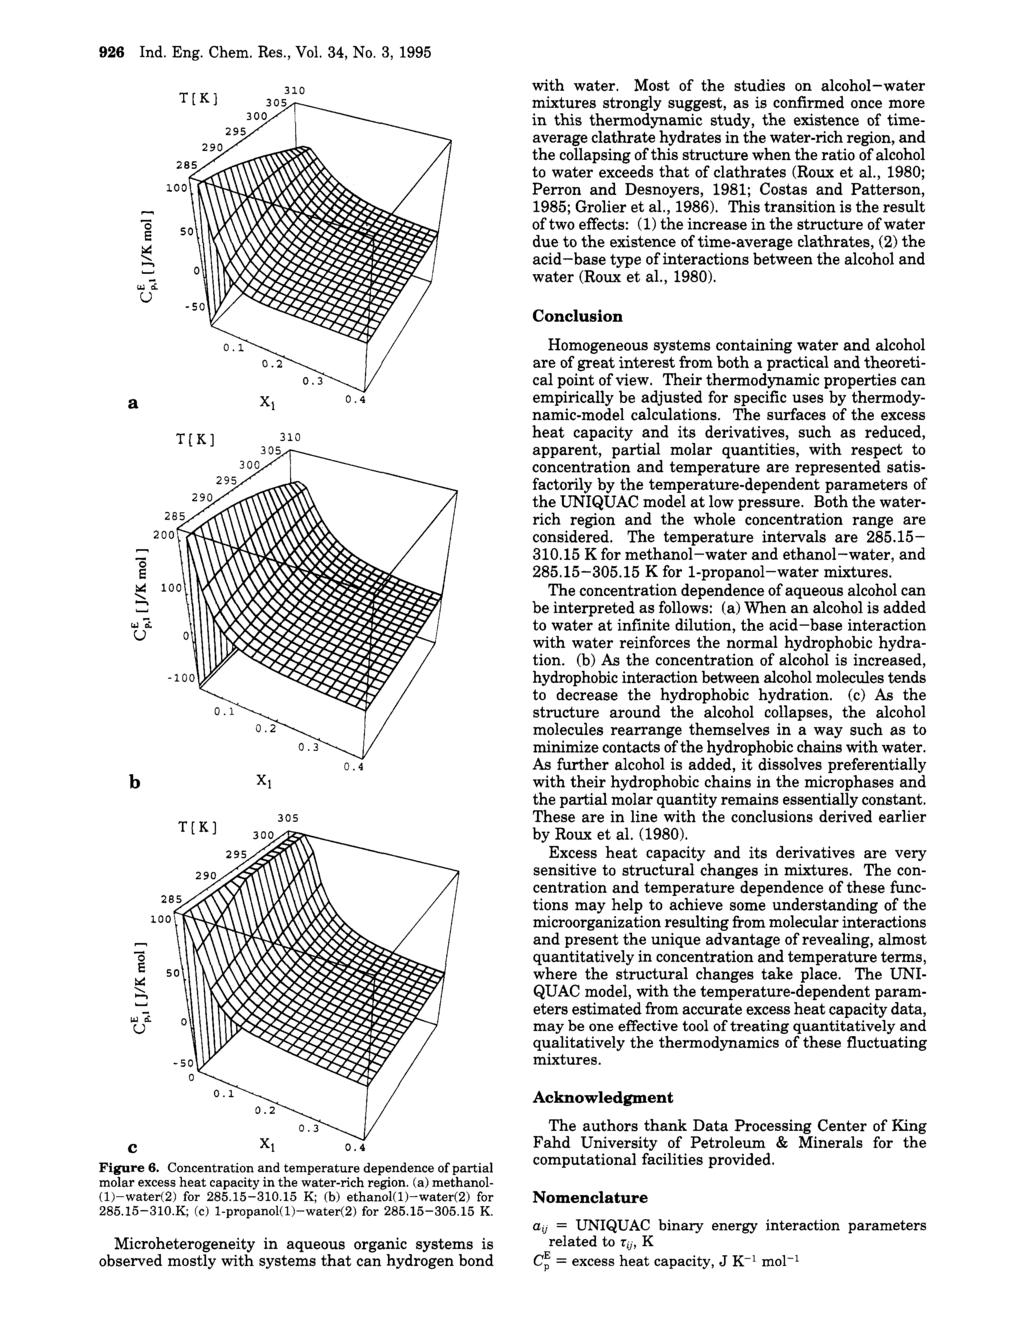 926 Ind. Eng. Chem. Res., Vol. 34, No. 3, 1995 a b -looi,y 300 X1 Y m,.r. 305 0.4 0.4 with water.